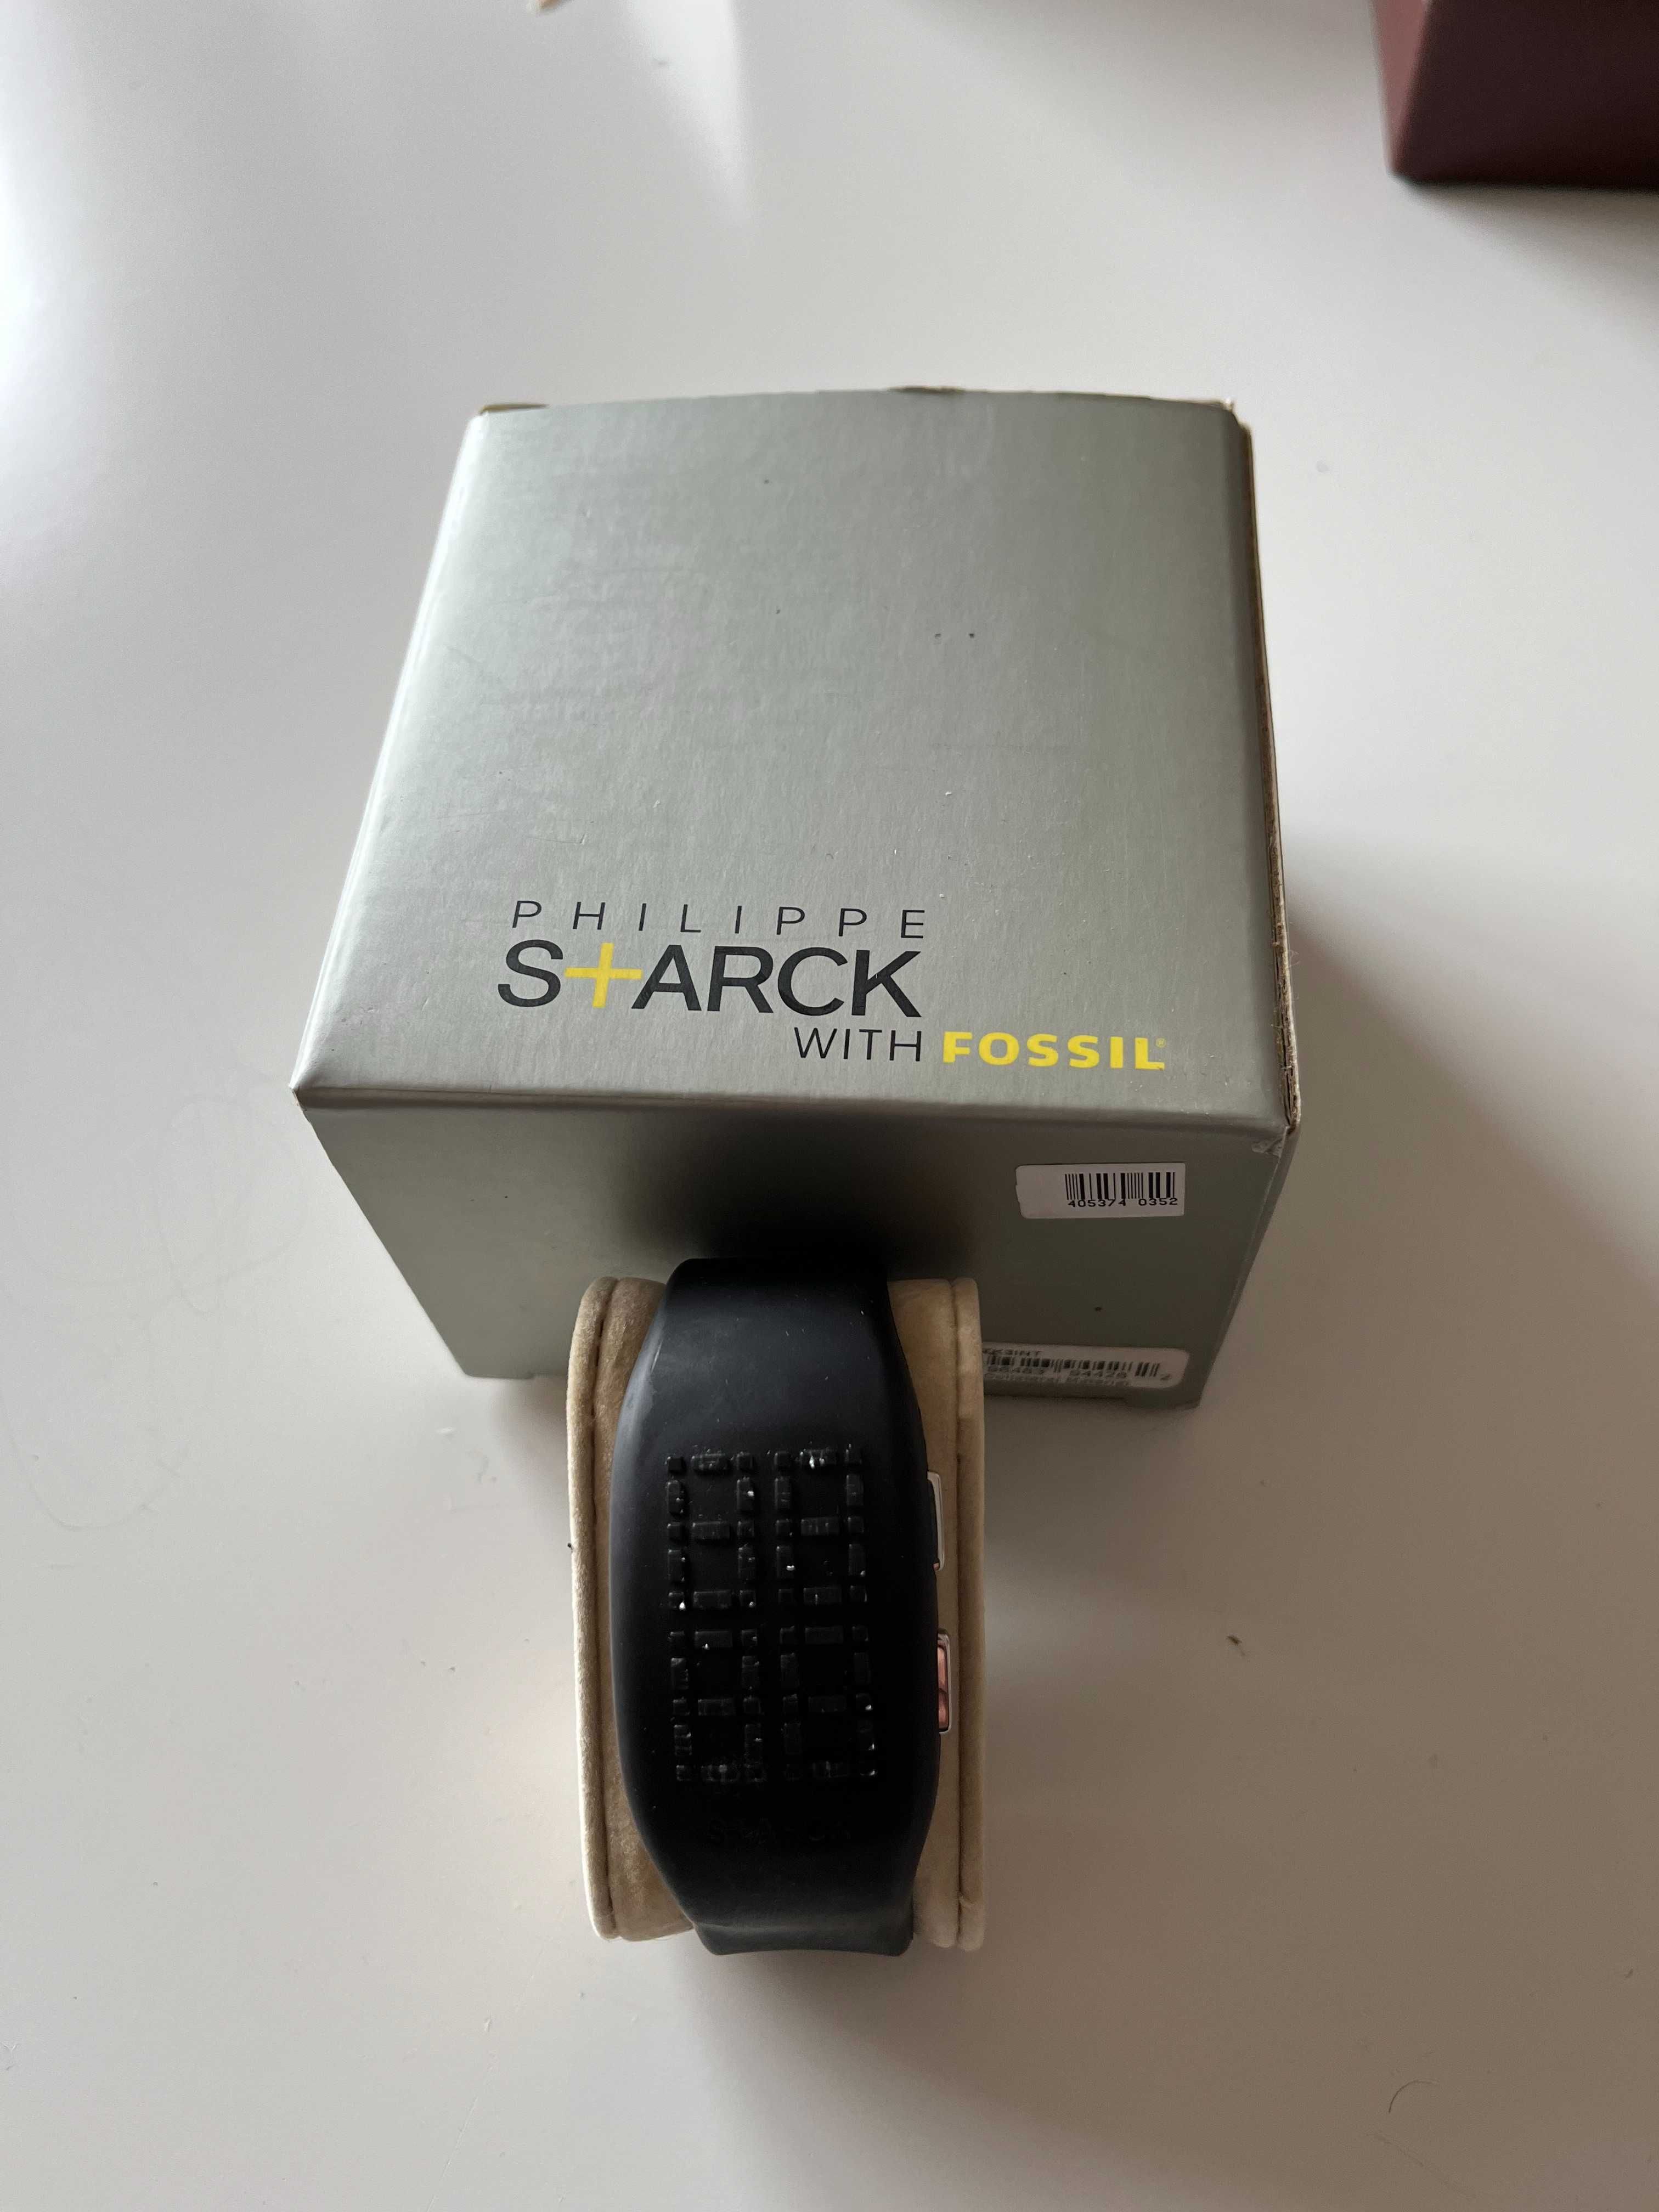 Philippe Starck with Fossil; LED digital watches